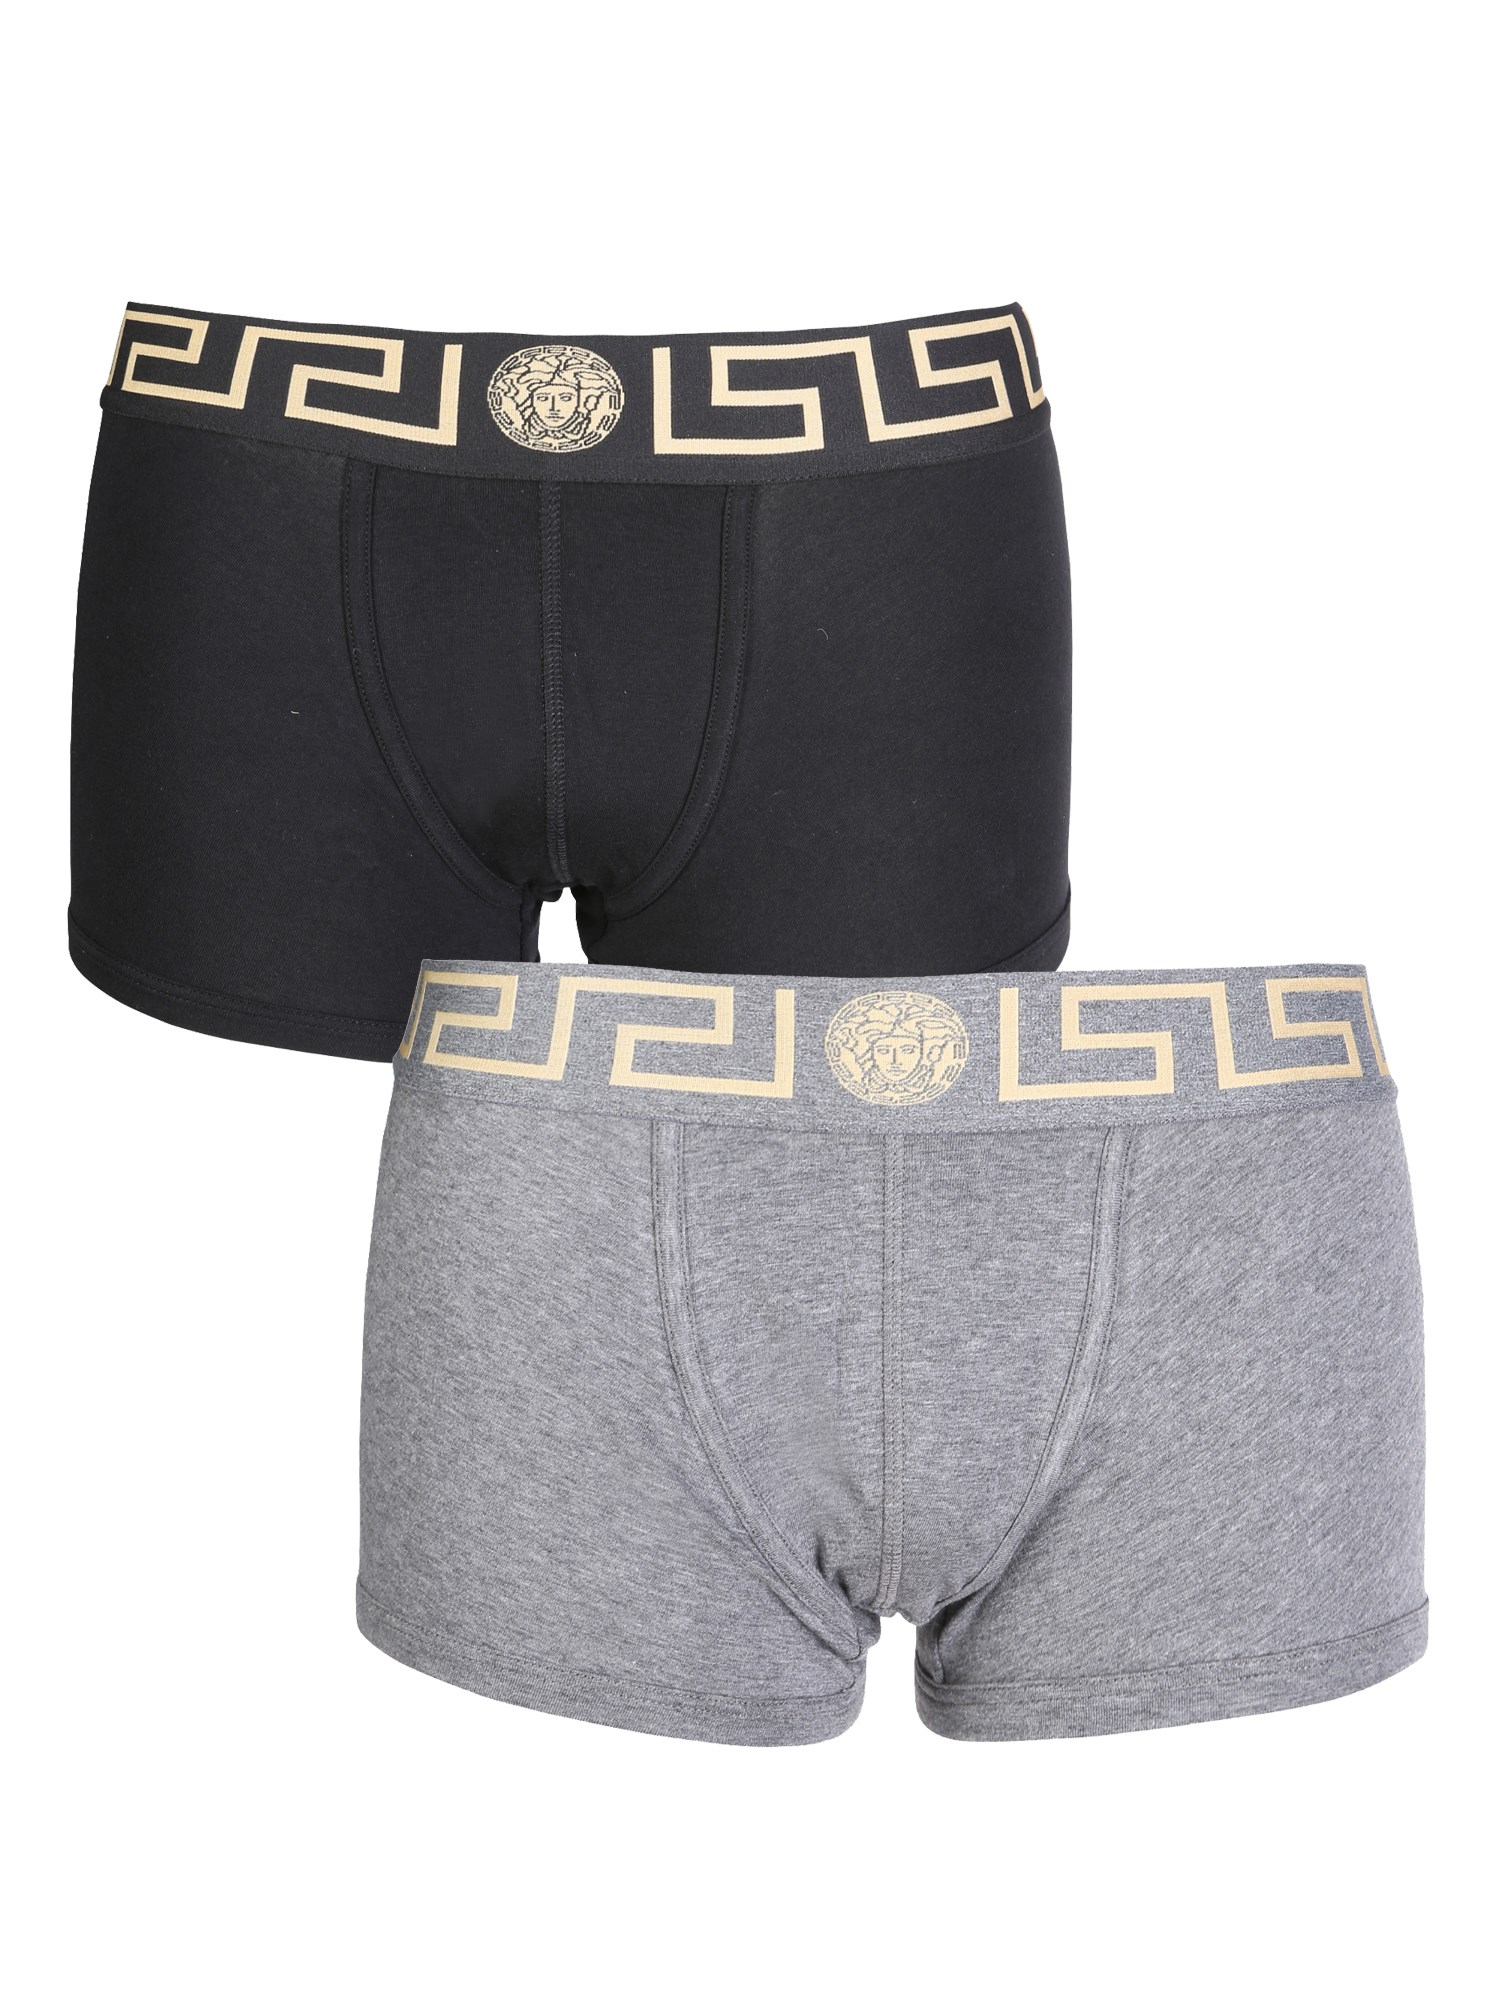 versace pack of two boxer shorts with greek